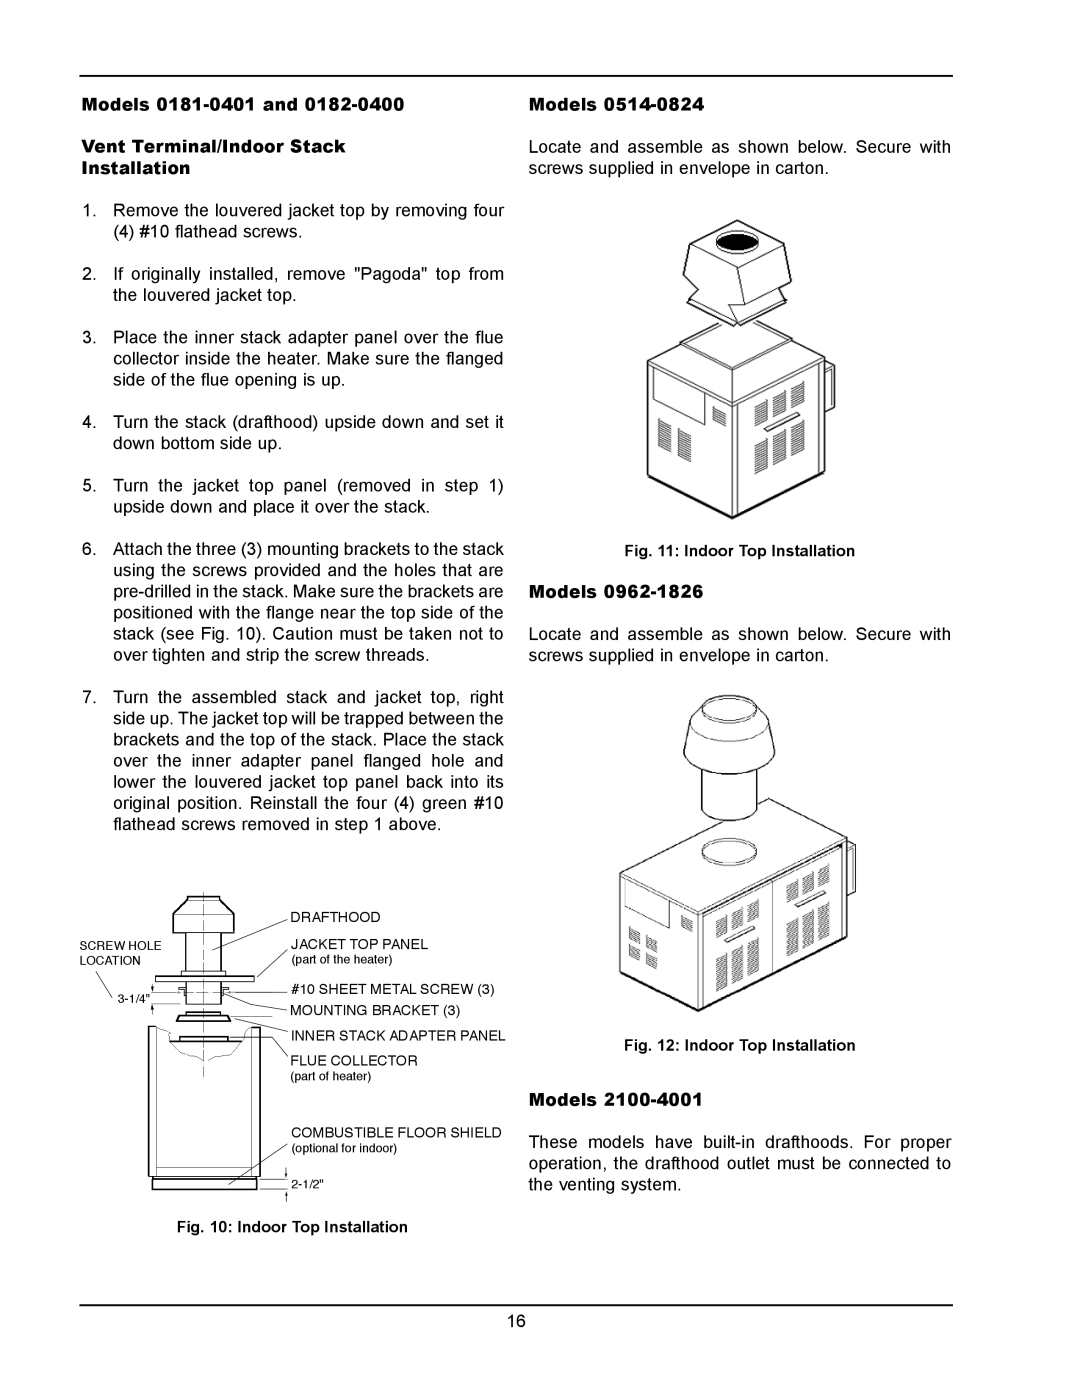 Raypak 1334001 operating instructions Models 0181-0401and Vent Terminal/Indoor Stack, Installation 